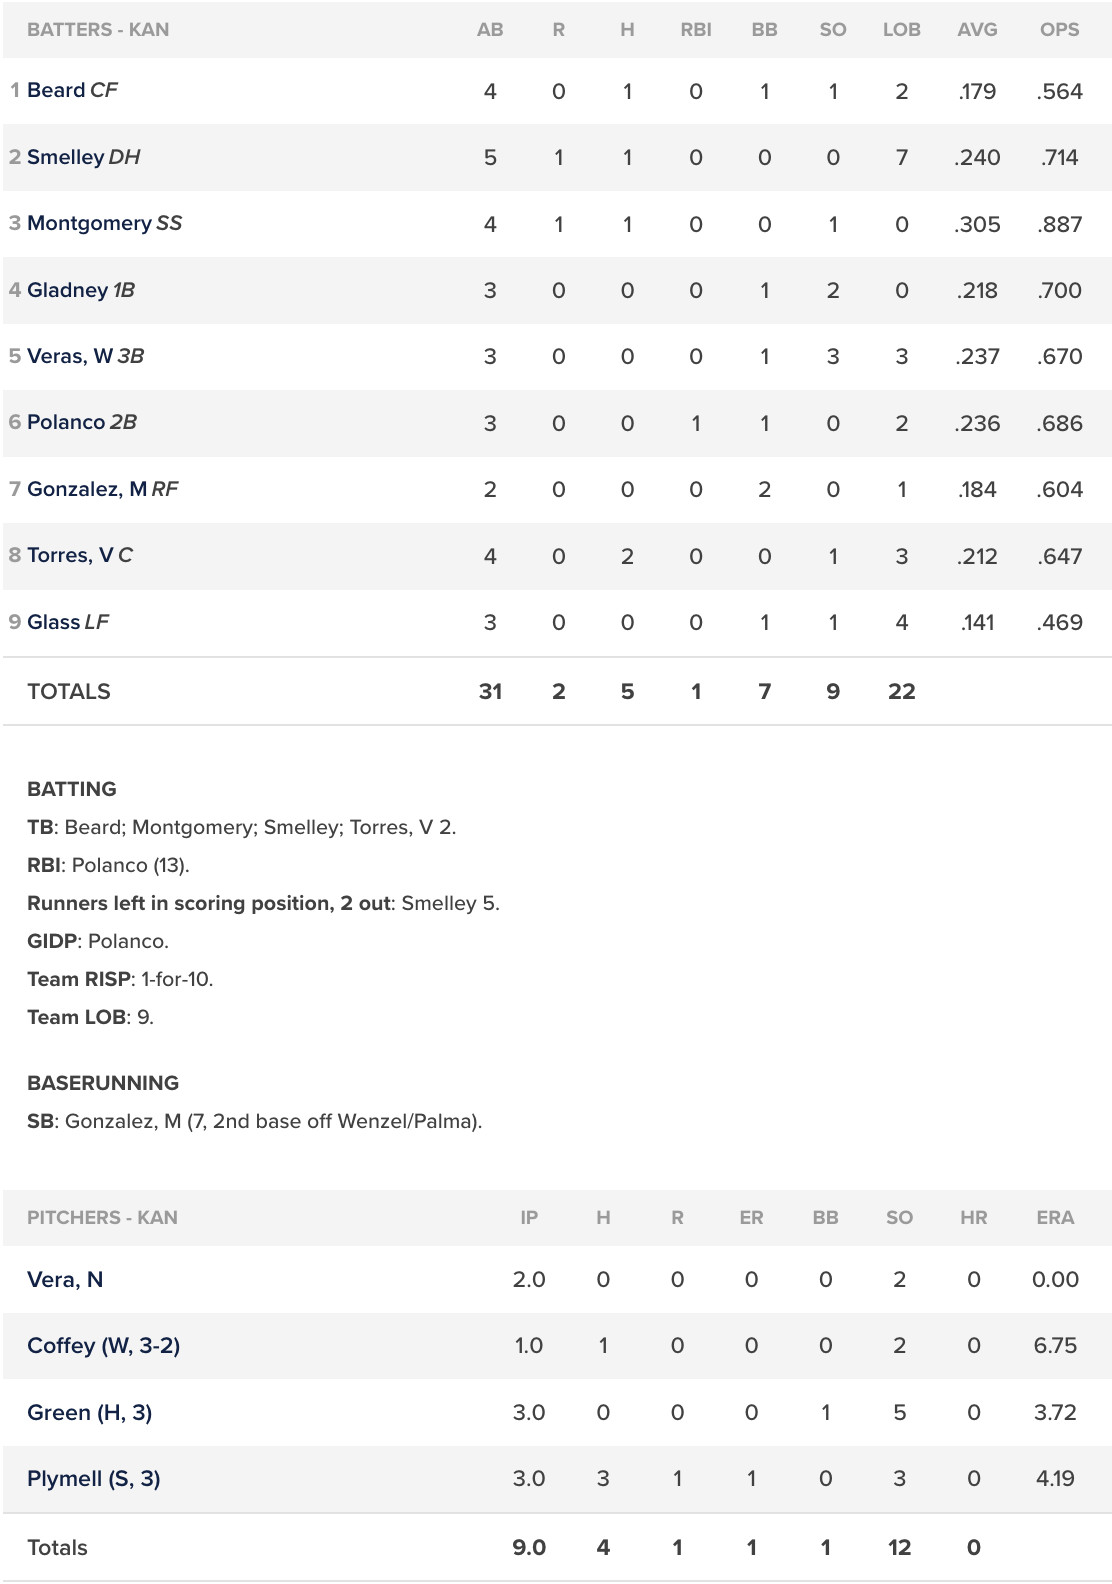 Batting and pitching stats